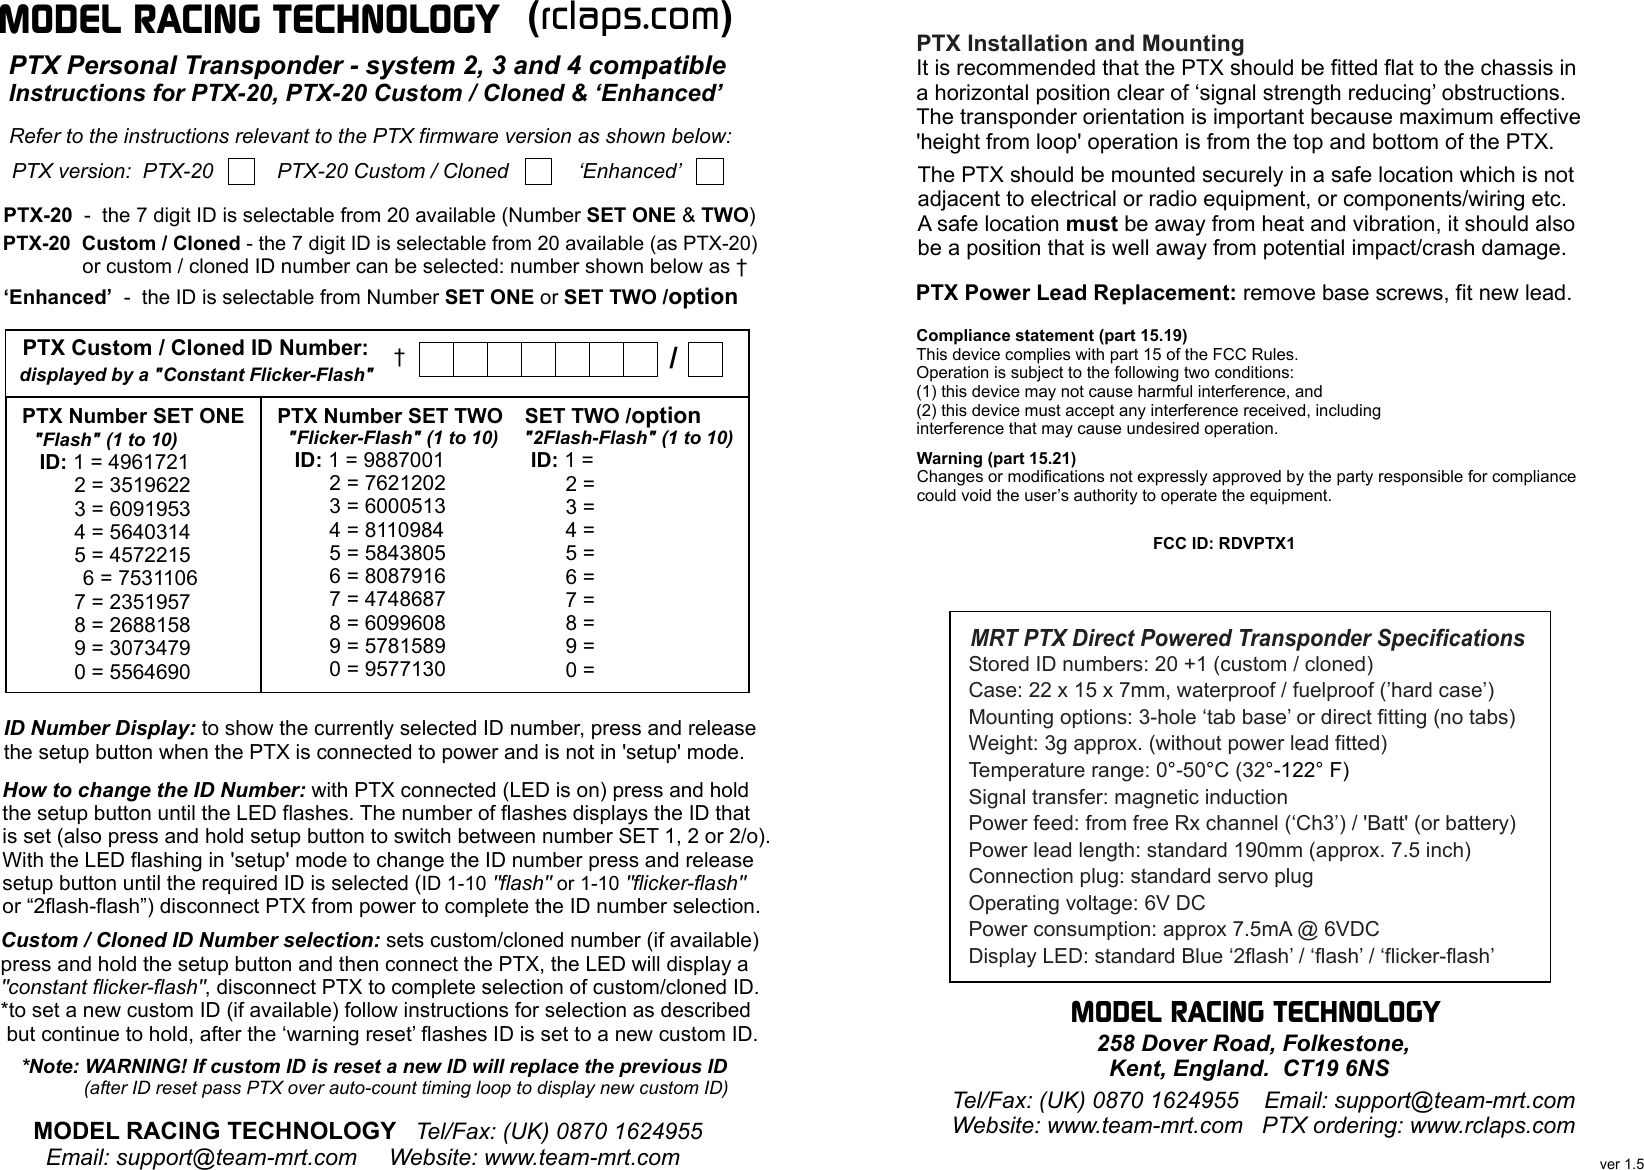 MODEL RACING TECHNOLOGY PTX version:  PTX-20           PTX-20 Custom / Cloned            ‘Enhanced’Refer to the instructions relevant to the PTX firmware version as shown below: PTX-20  -  the 7 digit ID is selectable from 20 available (Number SET ONE &amp; TWO)PTX-20  Custom / Cloned - the 7 digit ID is selectable from 20 available (as PTX-20)              or custom / cloned ID number can be selected: number shown below as †  MODEL RACING TECHNOLOGY   Tel/Fax: (UK) 0870 1624955   Email: support@team-mrt.com     Website: www.team-mrt.comID Number Display: to show the currently selected ID number, press and releasethe setup button when the PTX is connected to power and is not in &apos;setup&apos; mode.How to change the ID Number: with PTX connected (LED is on) press and holdthe setup button until the LED flashes. The number of flashes displays the ID thatis set (also press and hold setup button to switch between number SET 1, 2 or 2/o).With the LED flashing in &apos;setup&apos; mode to change the ID number press and releasesetup button until the required ID is selected (ID 1-10 &quot;flash&quot; or 1-10 &quot;flicker-flash&quot;or “2flash-flash”) disconnect PTX from power to complete the ID number selection.Custom / Cloned ID Number selection: sets custom/cloned number (if available)press and hold the setup button and then connect the PTX, the LED will display a&quot;constant flicker-flash&quot;, disconnect PTX to complete selection of custom/cloned ID.*to set a new custom ID (if available) follow instructions for selection as described  but continue to hold, after the ‘warning reset’ flashes ID is set to a new custom ID.*Note: WARNING! If custom ID is reset a new ID will replace the previous ID            (after ID reset pass PTX over auto-count timing loop to display new custom ID)(rclaps.com)PTX Number SET ONE  &quot;Flash&quot; (1 to 10)   ID: 1 = 4961721         2 = 3519622         3 = 6091953         4 = 5640314         5 = 4572215         6 = 7531106         7 = 2351957         8 = 2688158         9 = 3073479         0 = 5564690PTX Number SET TWO  &quot;Flicker-Flash&quot; (1 to 10)   ID: 1 = 9887001         2 = 7621202         3 = 6000513         4 = 8110984         5 = 5843805         6 = 8087916         7 = 4748687         8 = 6099608         9 = 5781589         0 = 9577130PTX Custom / Cloned ID Number:displayed by a &quot;Constant Flicker-Flash&quot;PTX Personal Transponder - system 2, 3 and 4 compatibleInstructions for PTX-20, PTX-20 Custom / Cloned &amp; ‘Enhanced’ ‘Enhanced’  -  the ID is selectable from Number SET ONE or SET TWO /option  †  SET TWO /option  &quot;2Flash-Flash&quot; (1 to 10)   ID: 1 =          2 =          3 =          4 =          5 =          6 =          7 =          8 =          9 =          0 = /       Tel/Fax: (UK) 0870 1624955    Email: support@team-mrt.com    Website: www.team-mrt.com   PTX ordering: www.rclaps.com   ver 1.5MRT PTX Direct Powered Transponder SpecificationsPTX Installation and MountingIt is recommended that the PTX should be fitted flat to the chassis ina horizontal position clear of ‘signal strength reducing’ obstructions.The transponder orientation is important because maximum effective&apos;height from loop&apos; operation is from the top and bottom of the PTX.The PTX should be mounted securely in a safe location which is notadjacent to electrical or radio equipment, or components/wiring etc.A safe location must be away from heat and vibration, it should alsobe a position that is well away from potential impact/crash damage.PTX Power Lead Replacement: remove base screws, fit new lead.MODEL RACING TECHNOLOGY    258 Dover Road, Folkestone,      Kent, England.  CT19 6NSCompliance statement (part 15.19)This device complies with part 15 of the FCC Rules.Operation is subject to the following two conditions:(1) this device may not cause harmful interference, and(2) this device must accept any interference received, includinginterference that may cause undesired operation. FCC ID: RDVPTX1Warning (part 15.21)Changes or modifications not expressly approved by the party responsible for compliancecould void the user’s authority to operate the equipment.Stored ID numbers: 20 +1 (custom / cloned)Case: 22 x 15 x 7mm, waterproof / fuelproof (’hard case’)Mounting options: 3-hole ‘tab base’ or direct fitting (no tabs)Weight: 3g approx. (without power lead fitted)Temperature range: 0°-50°C (32°-122° F)Power feed: from free Rx channel (‘Ch3’) / &apos;Batt&apos; (or battery)Power lead length: standard 190mm (approx. 7.5 inch)Connection plug: standard servo plugOperating voltage: 6V DCPower consumption: approx 7.5mA @ 6VDCDisplay LED: standard Blue ‘2flash’ / ‘flash’ / ‘flicker-flash’Signal transfer: magnetic induction